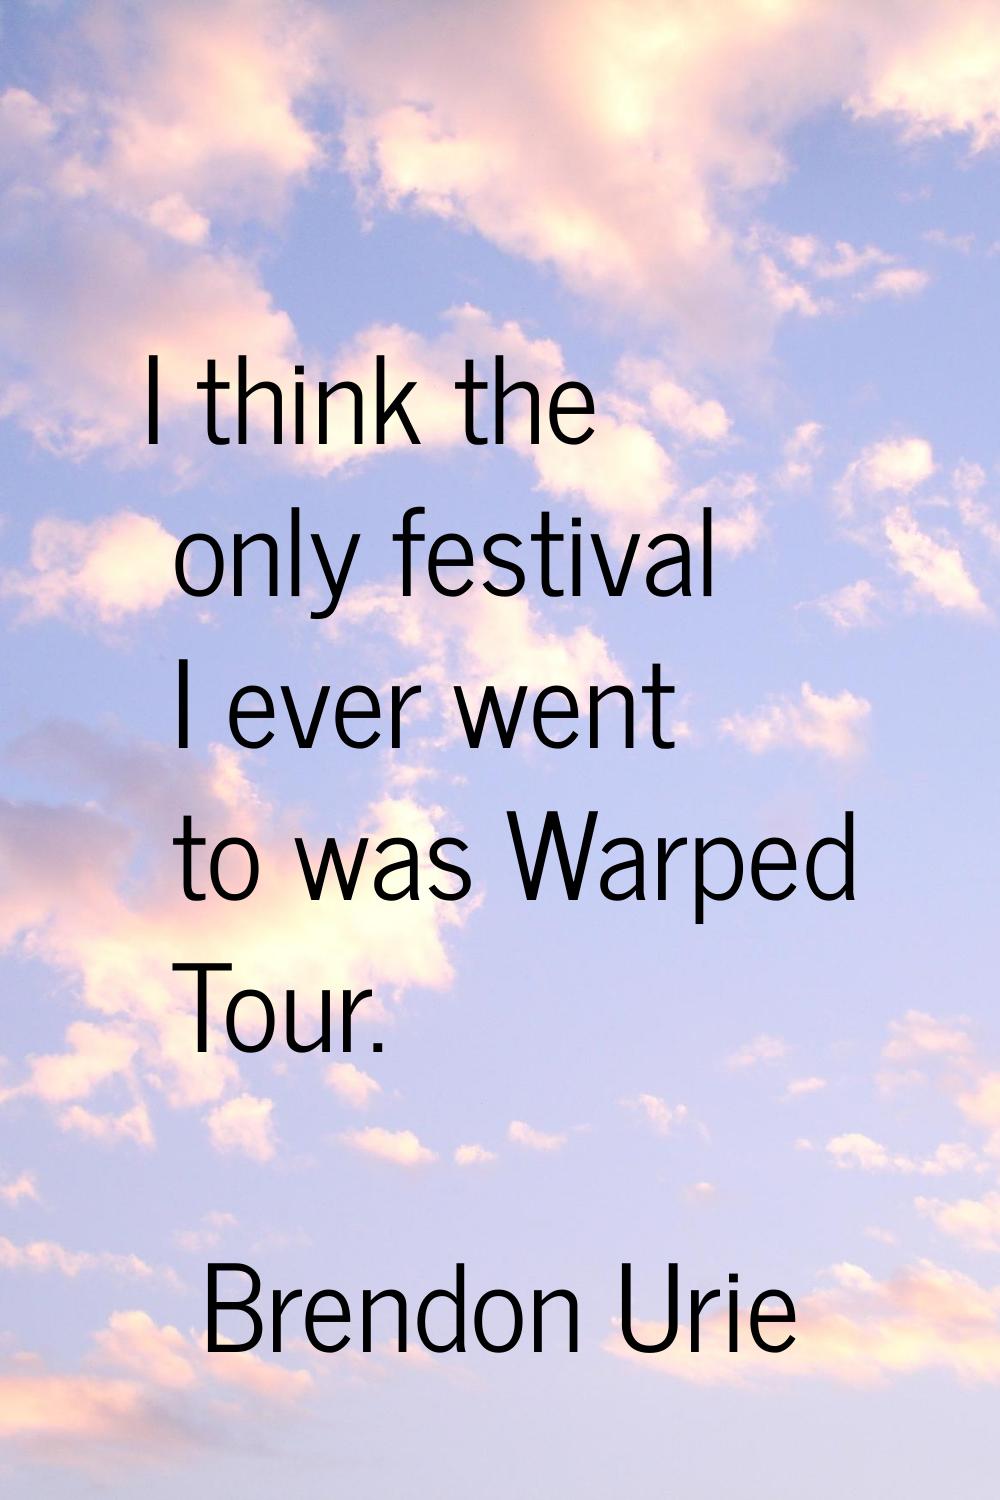 I think the only festival I ever went to was Warped Tour.